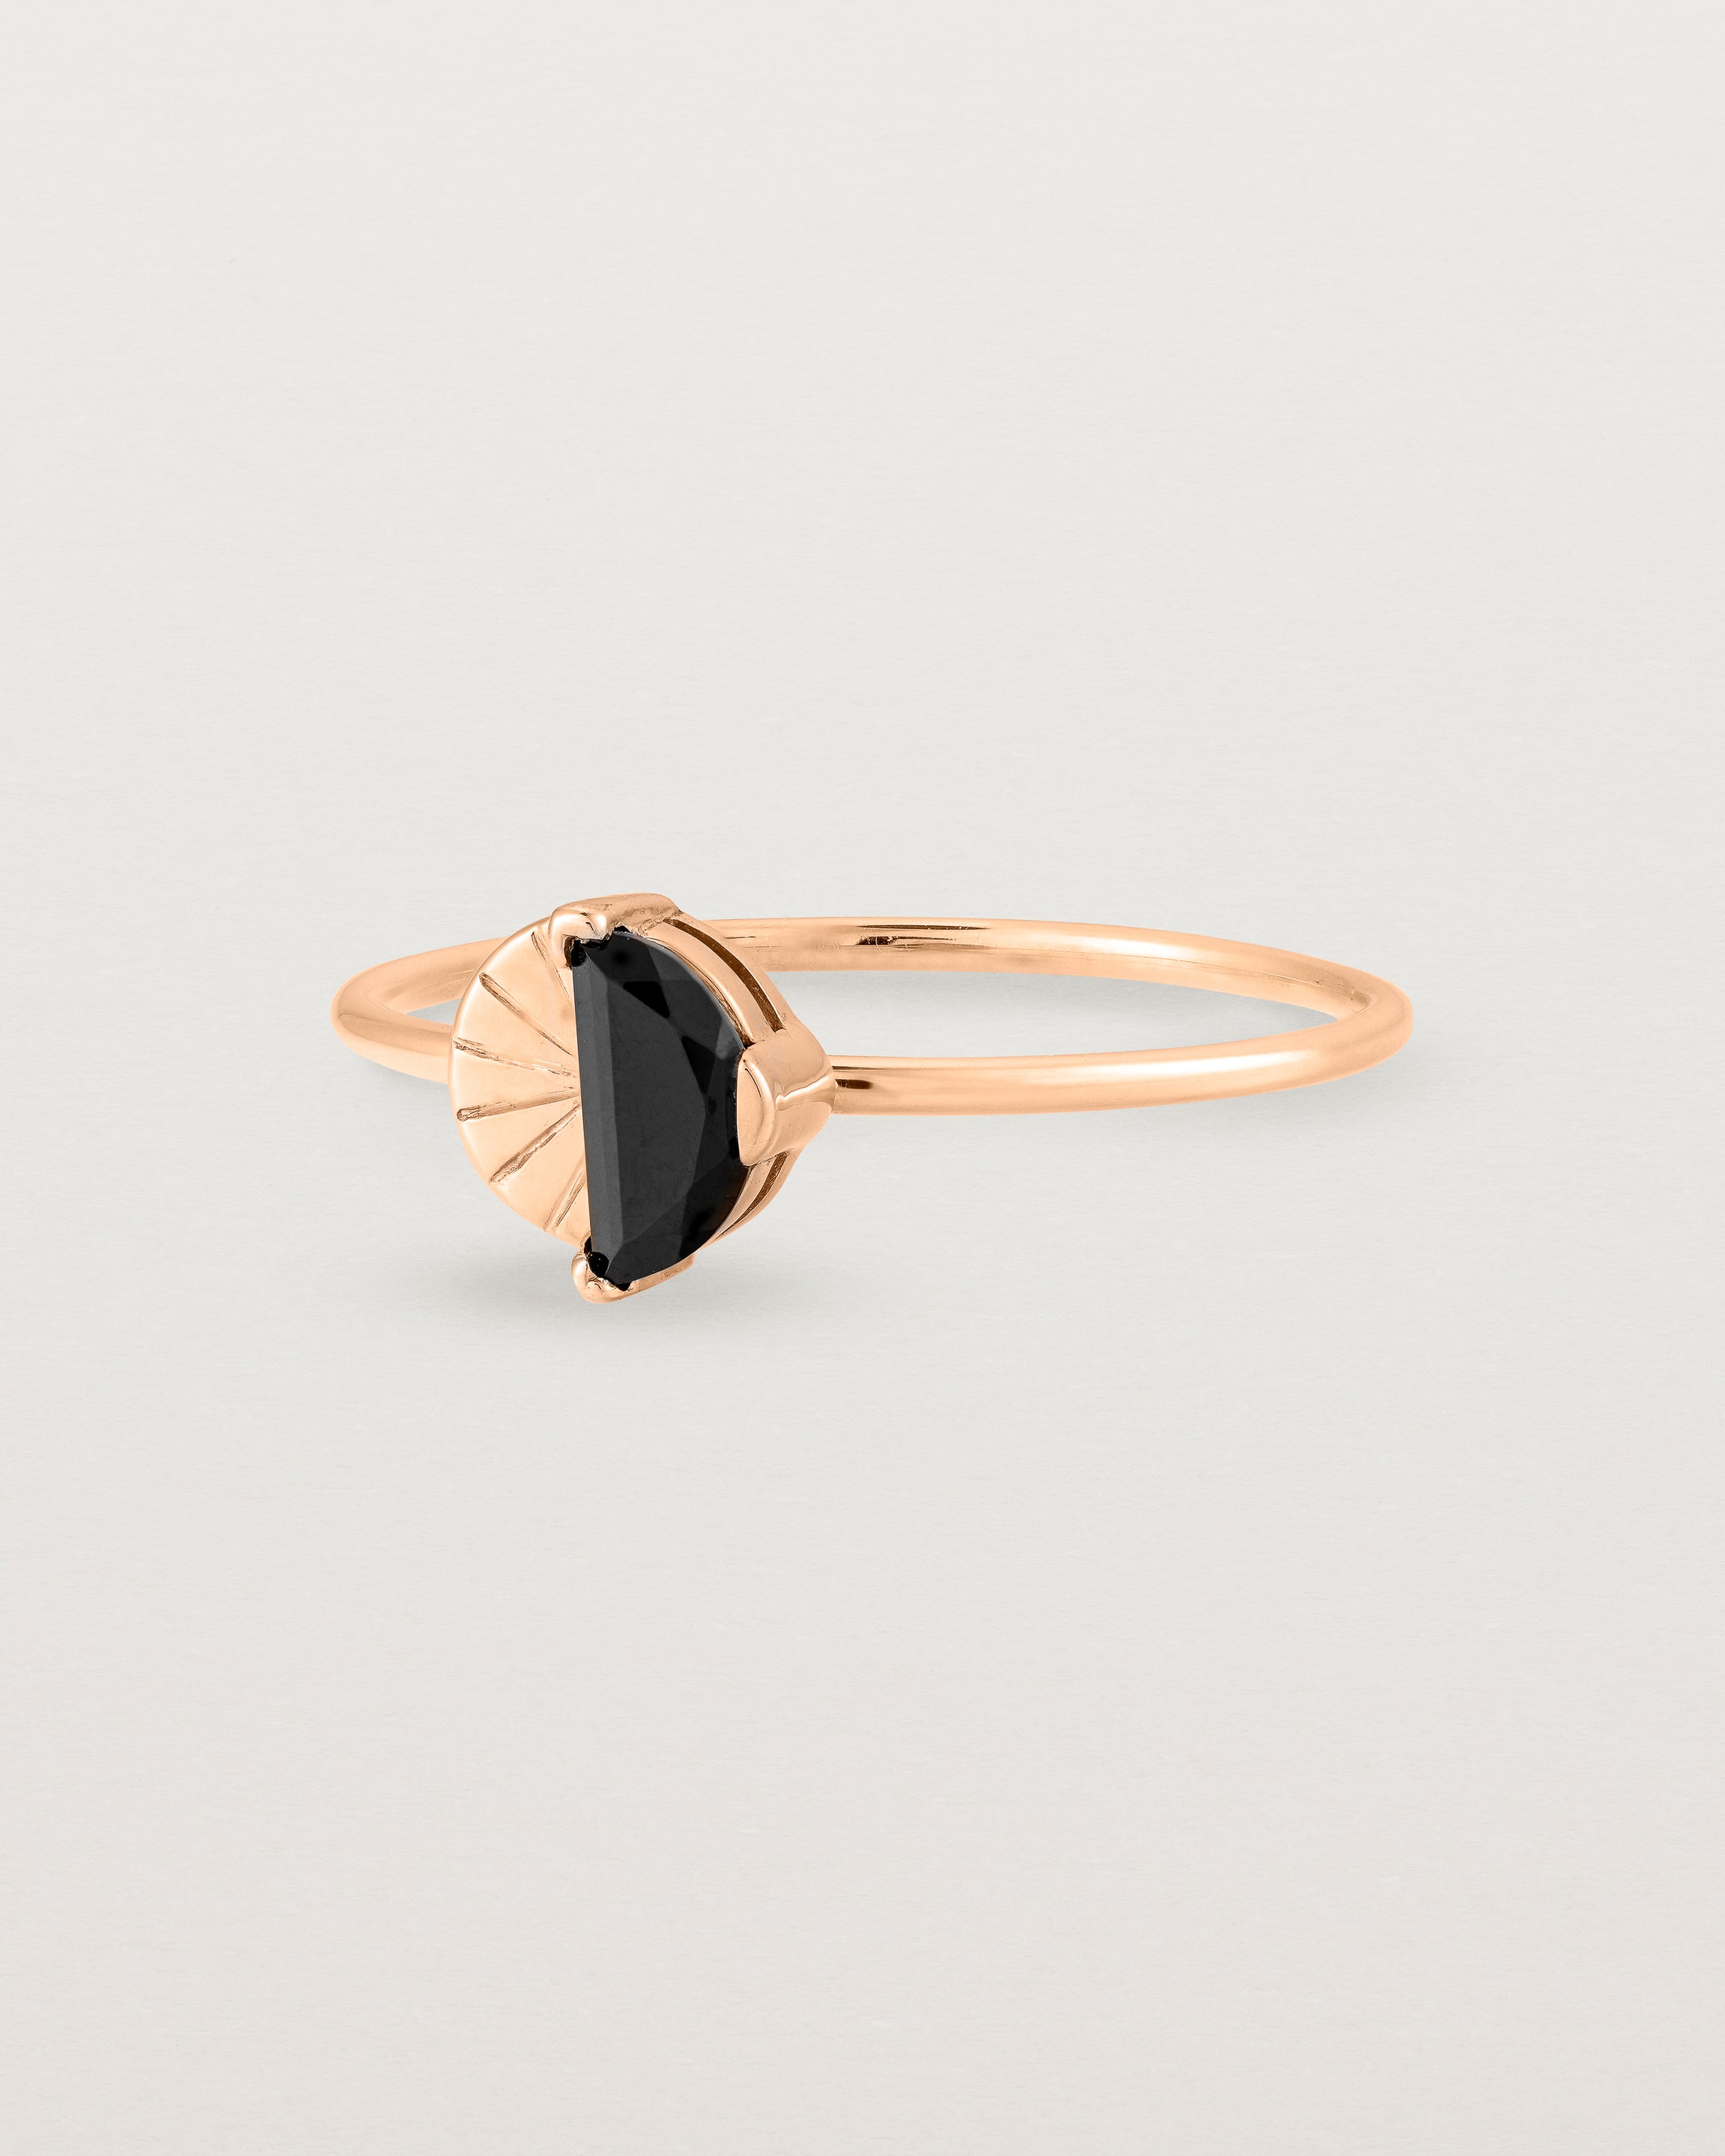 Angled view of the Jia Stone Ring | Black Spinel in Rose Gold.